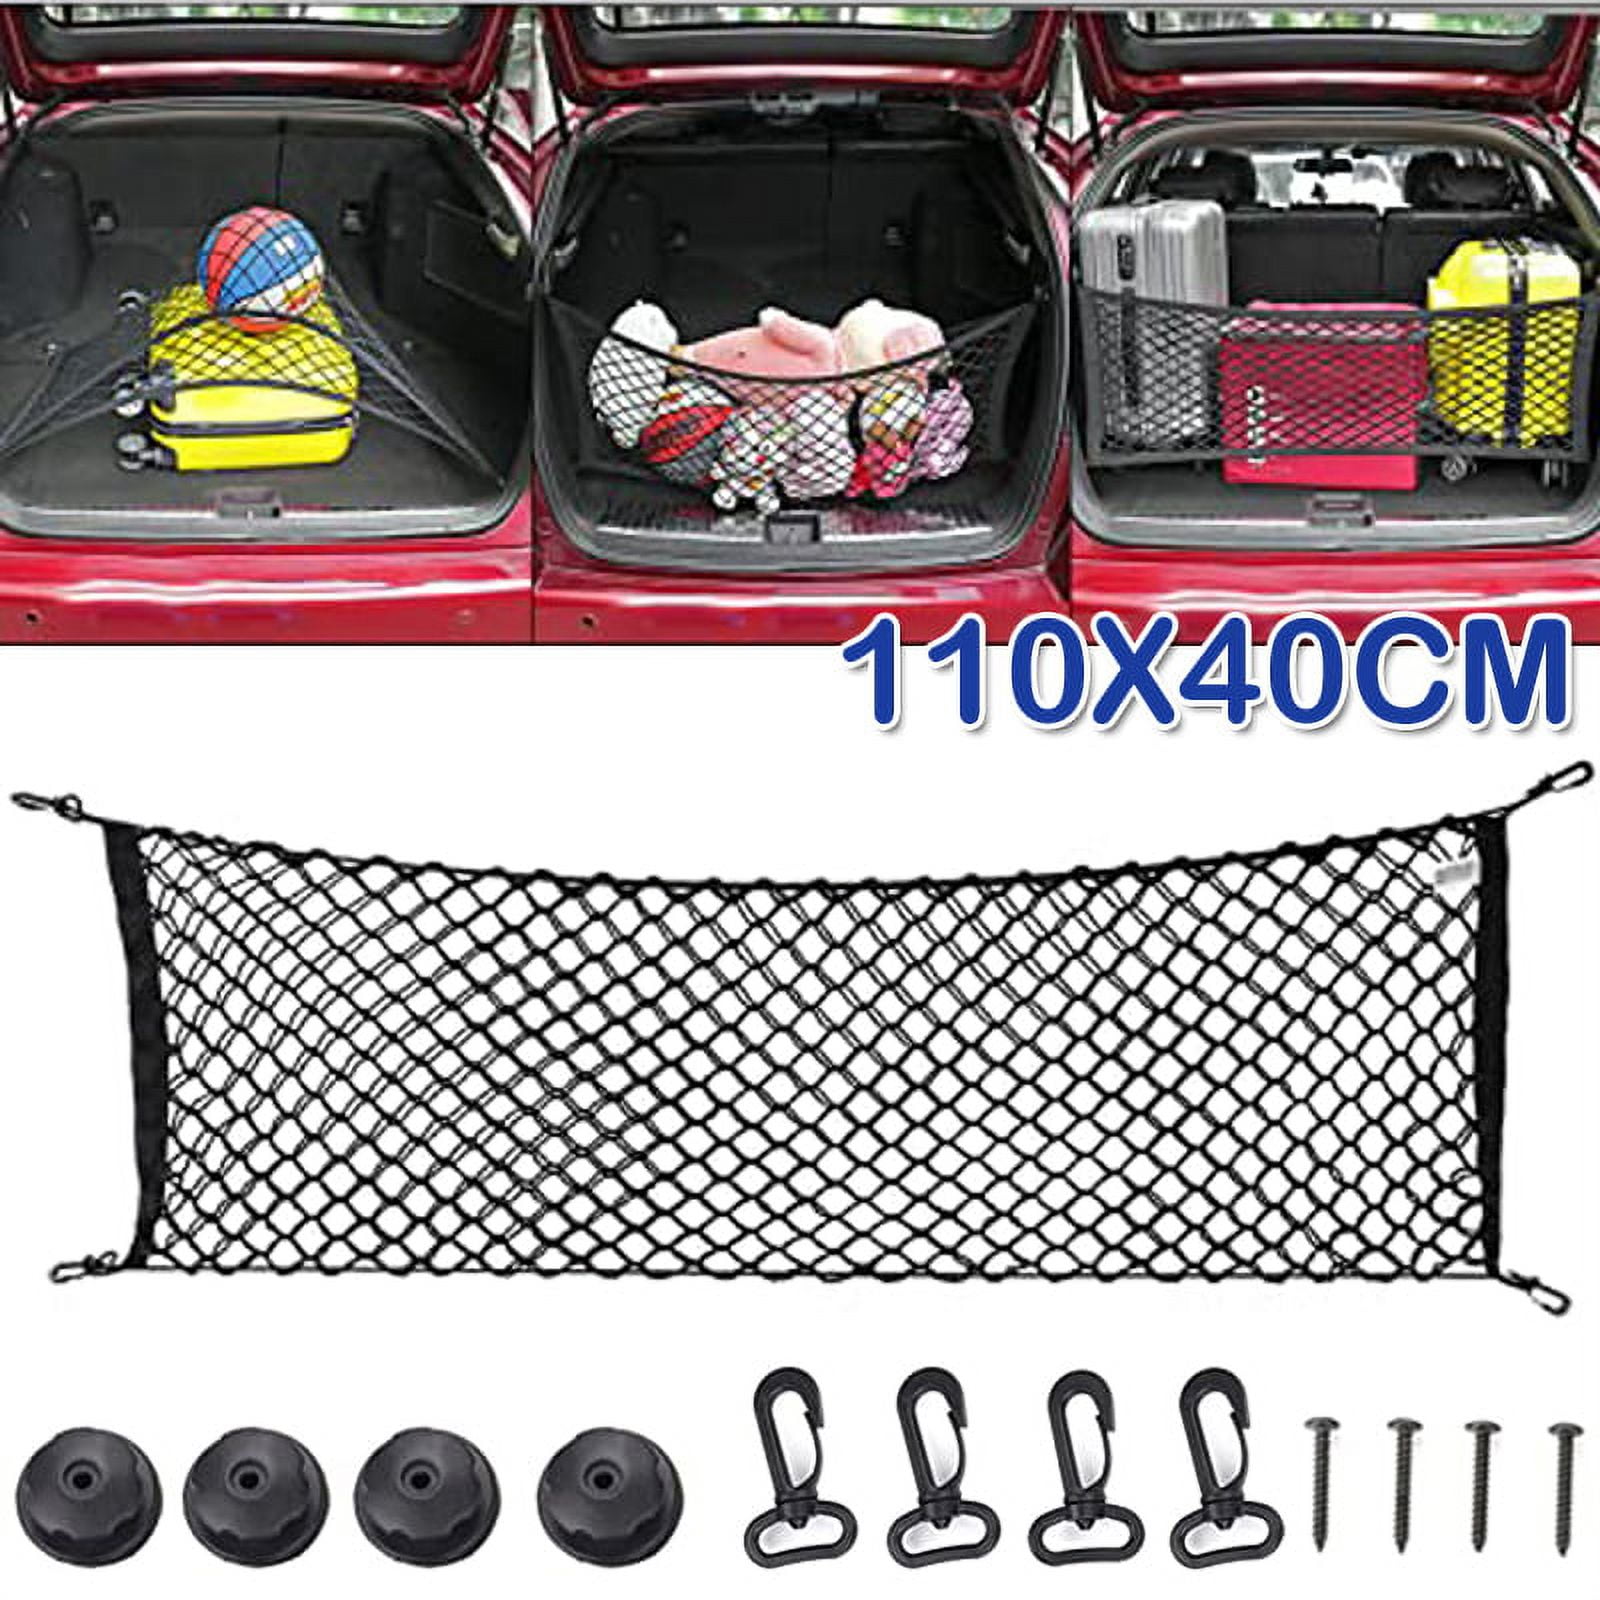 ZAROSO Car Boot Organiser with Large Mesh Pockets for More Storage Space